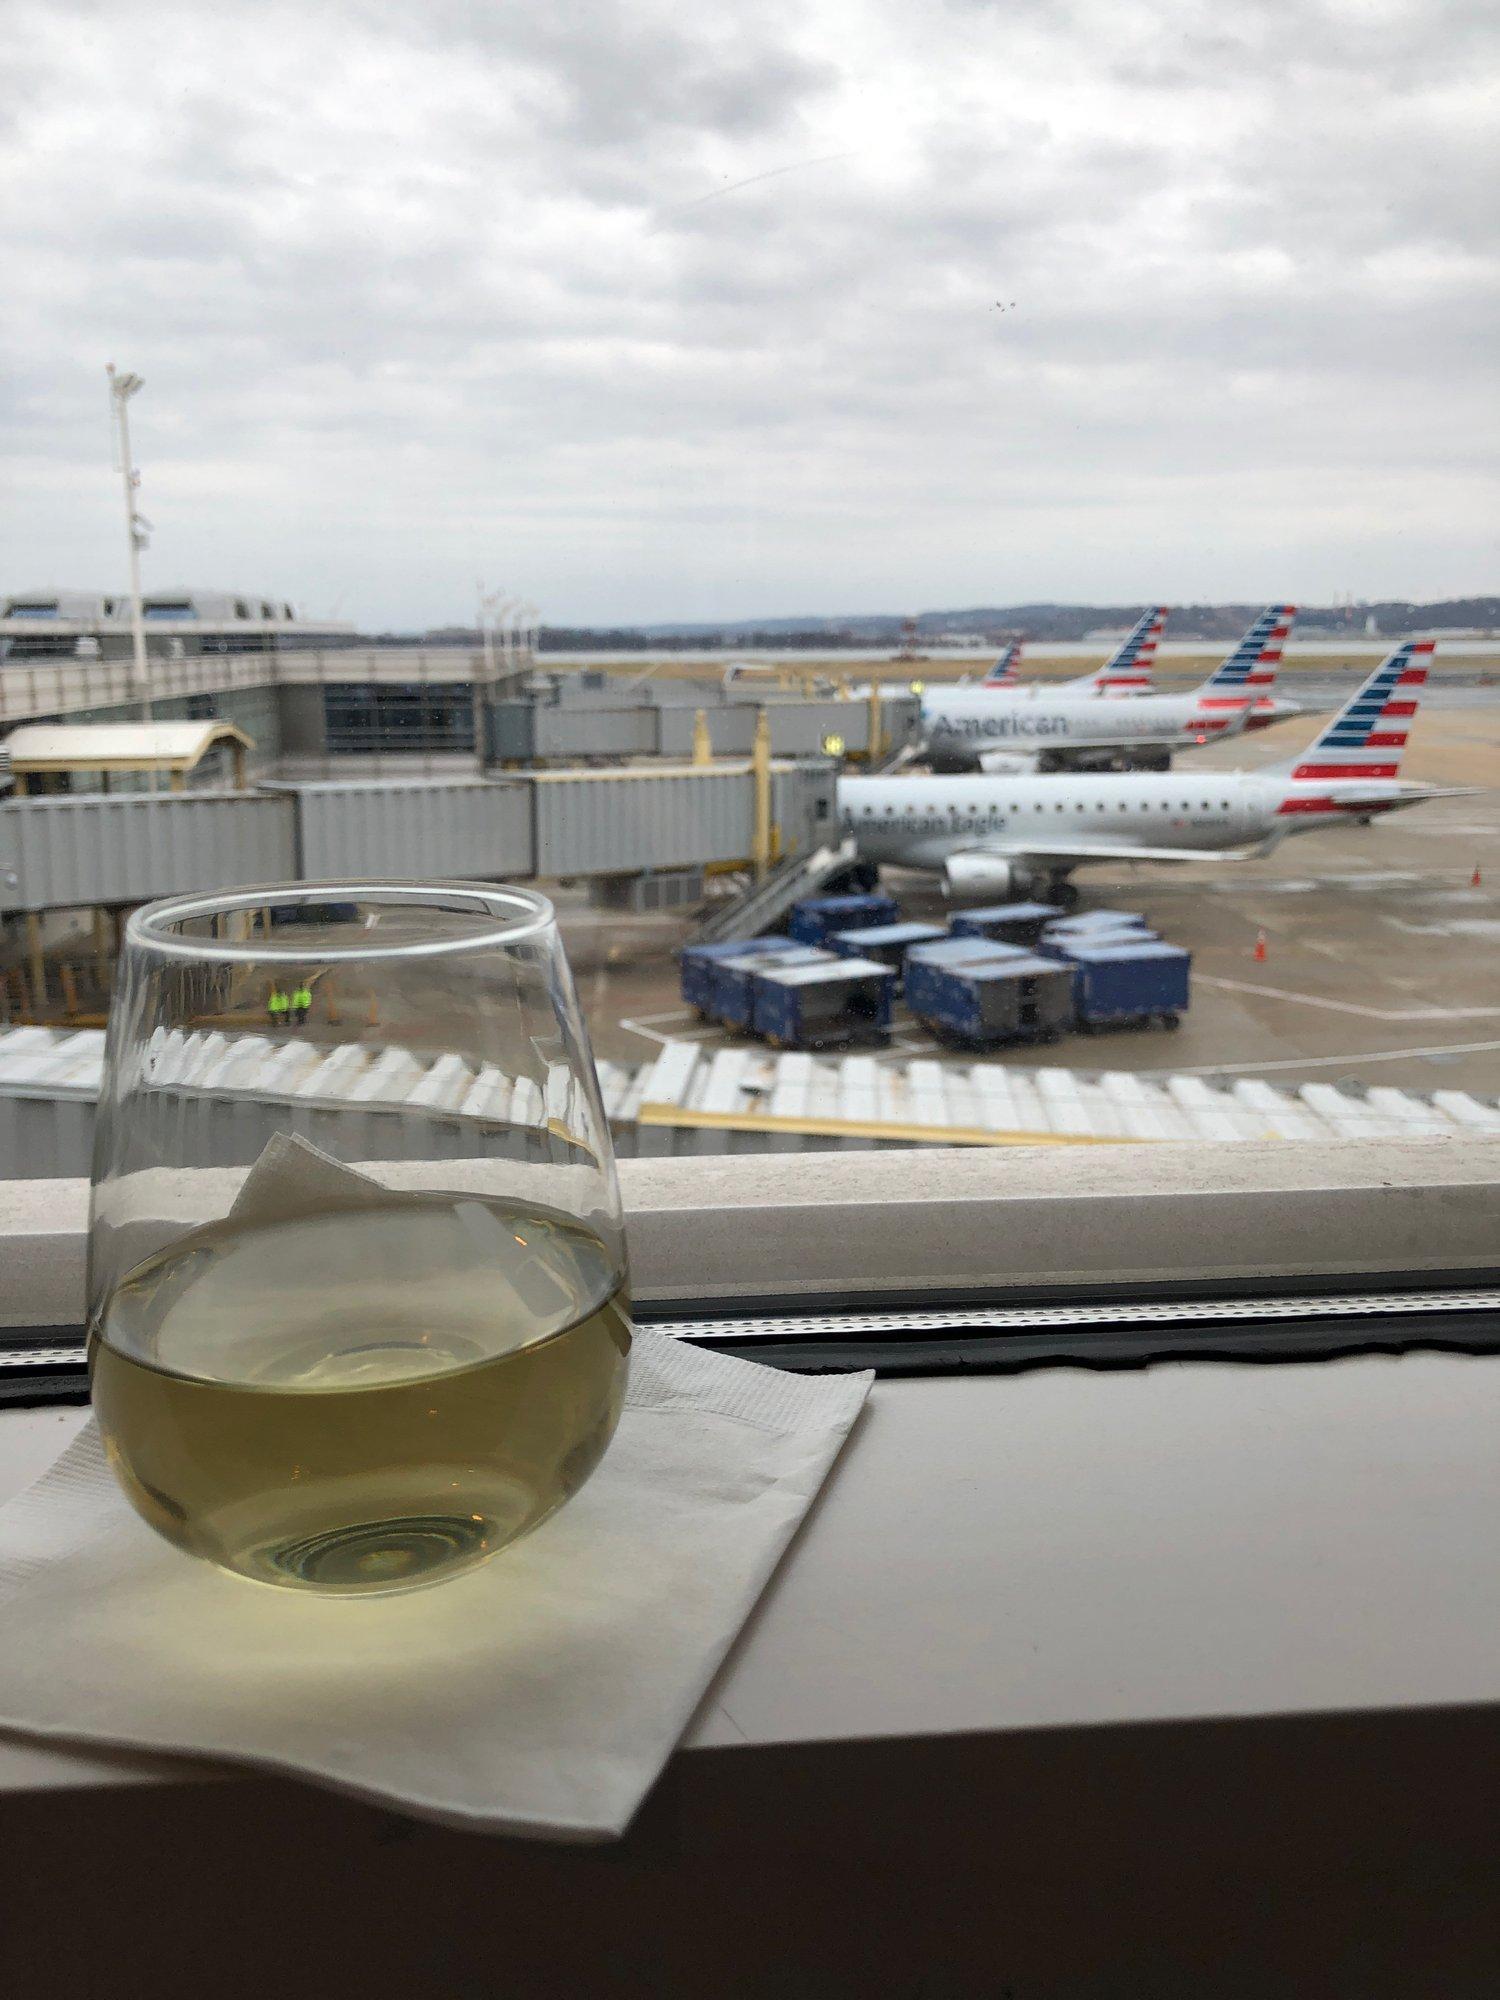 American Airlines Admirals Club image 14 of 19